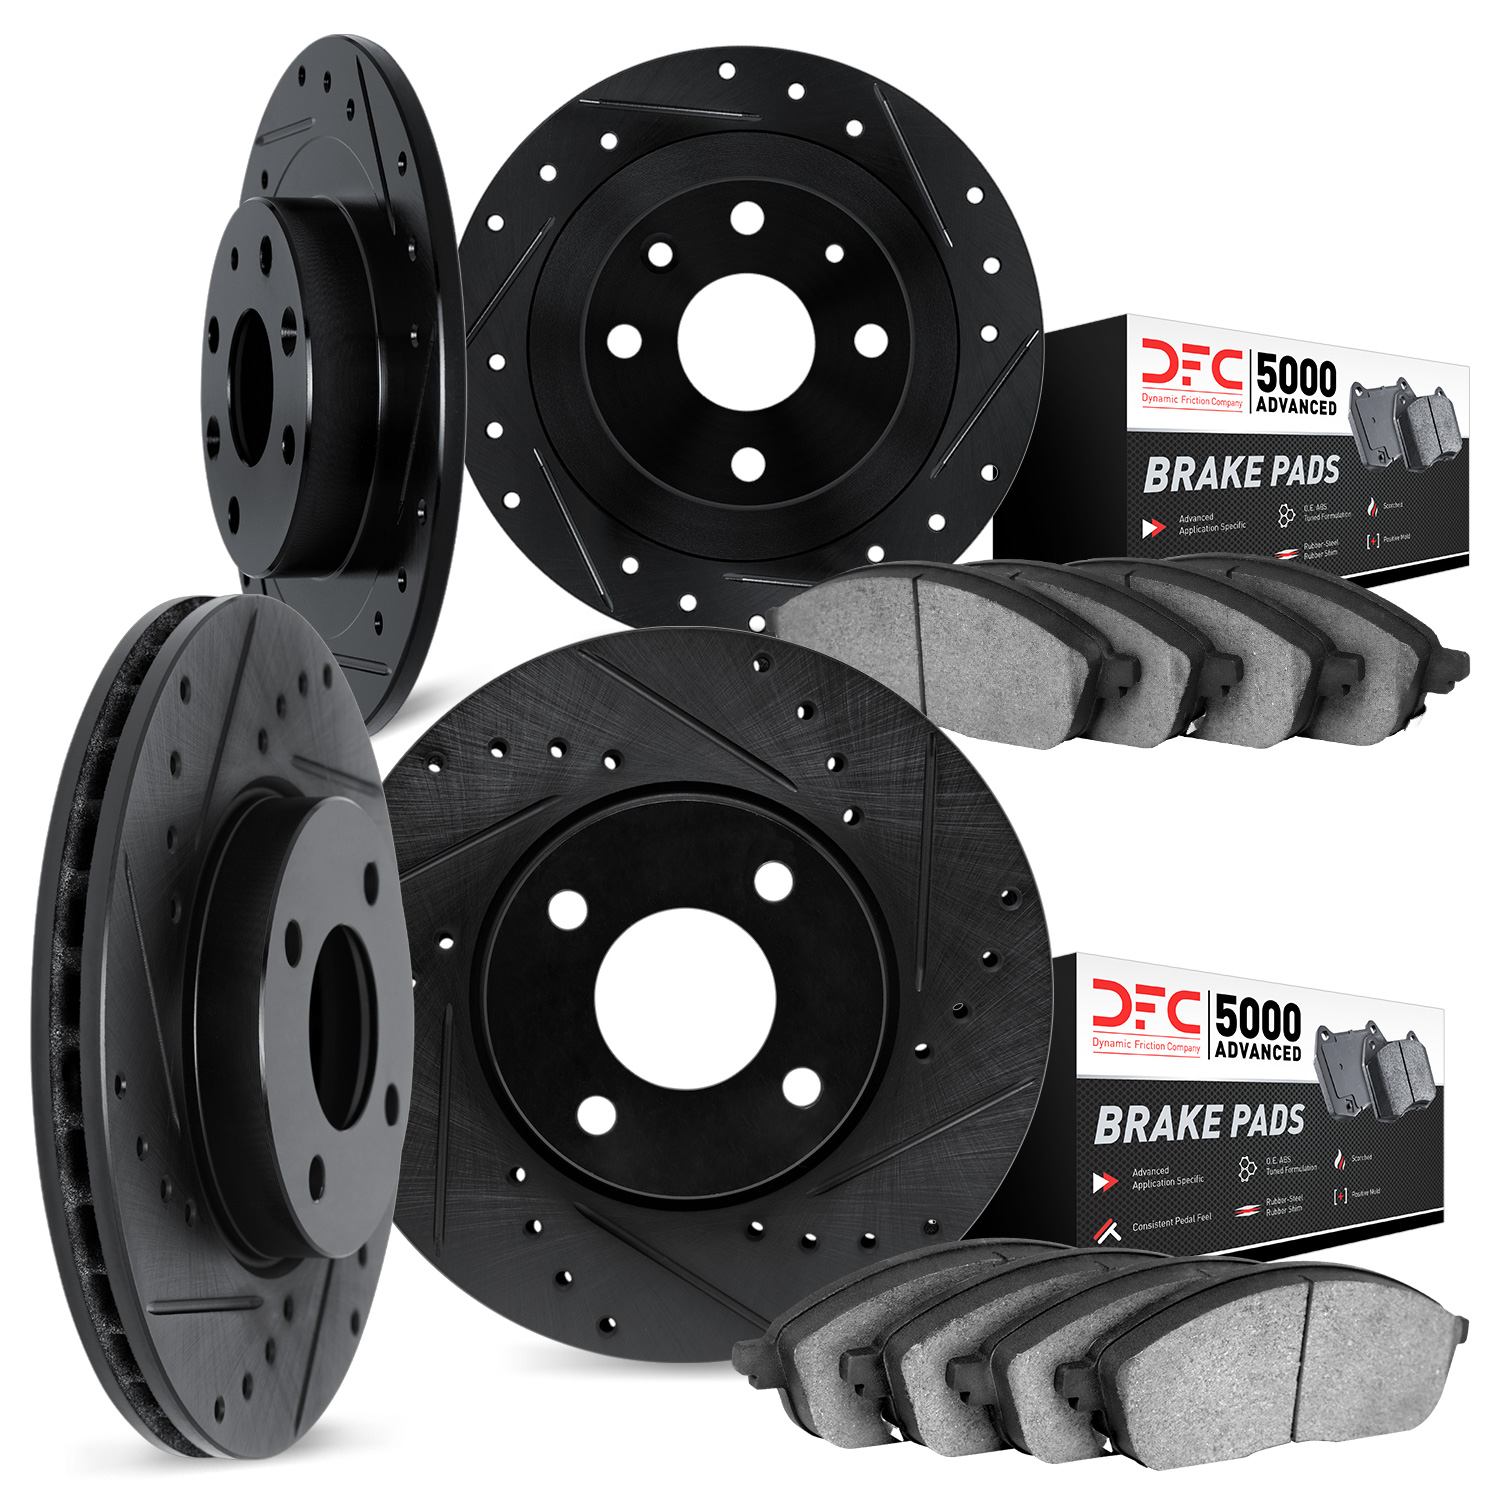 8504-54400 Drilled/Slotted Brake Rotors w/5000 Advanced Brake Pads Kit [Black], Fits Select Ford/Lincoln/Mercury/Mazda, Position